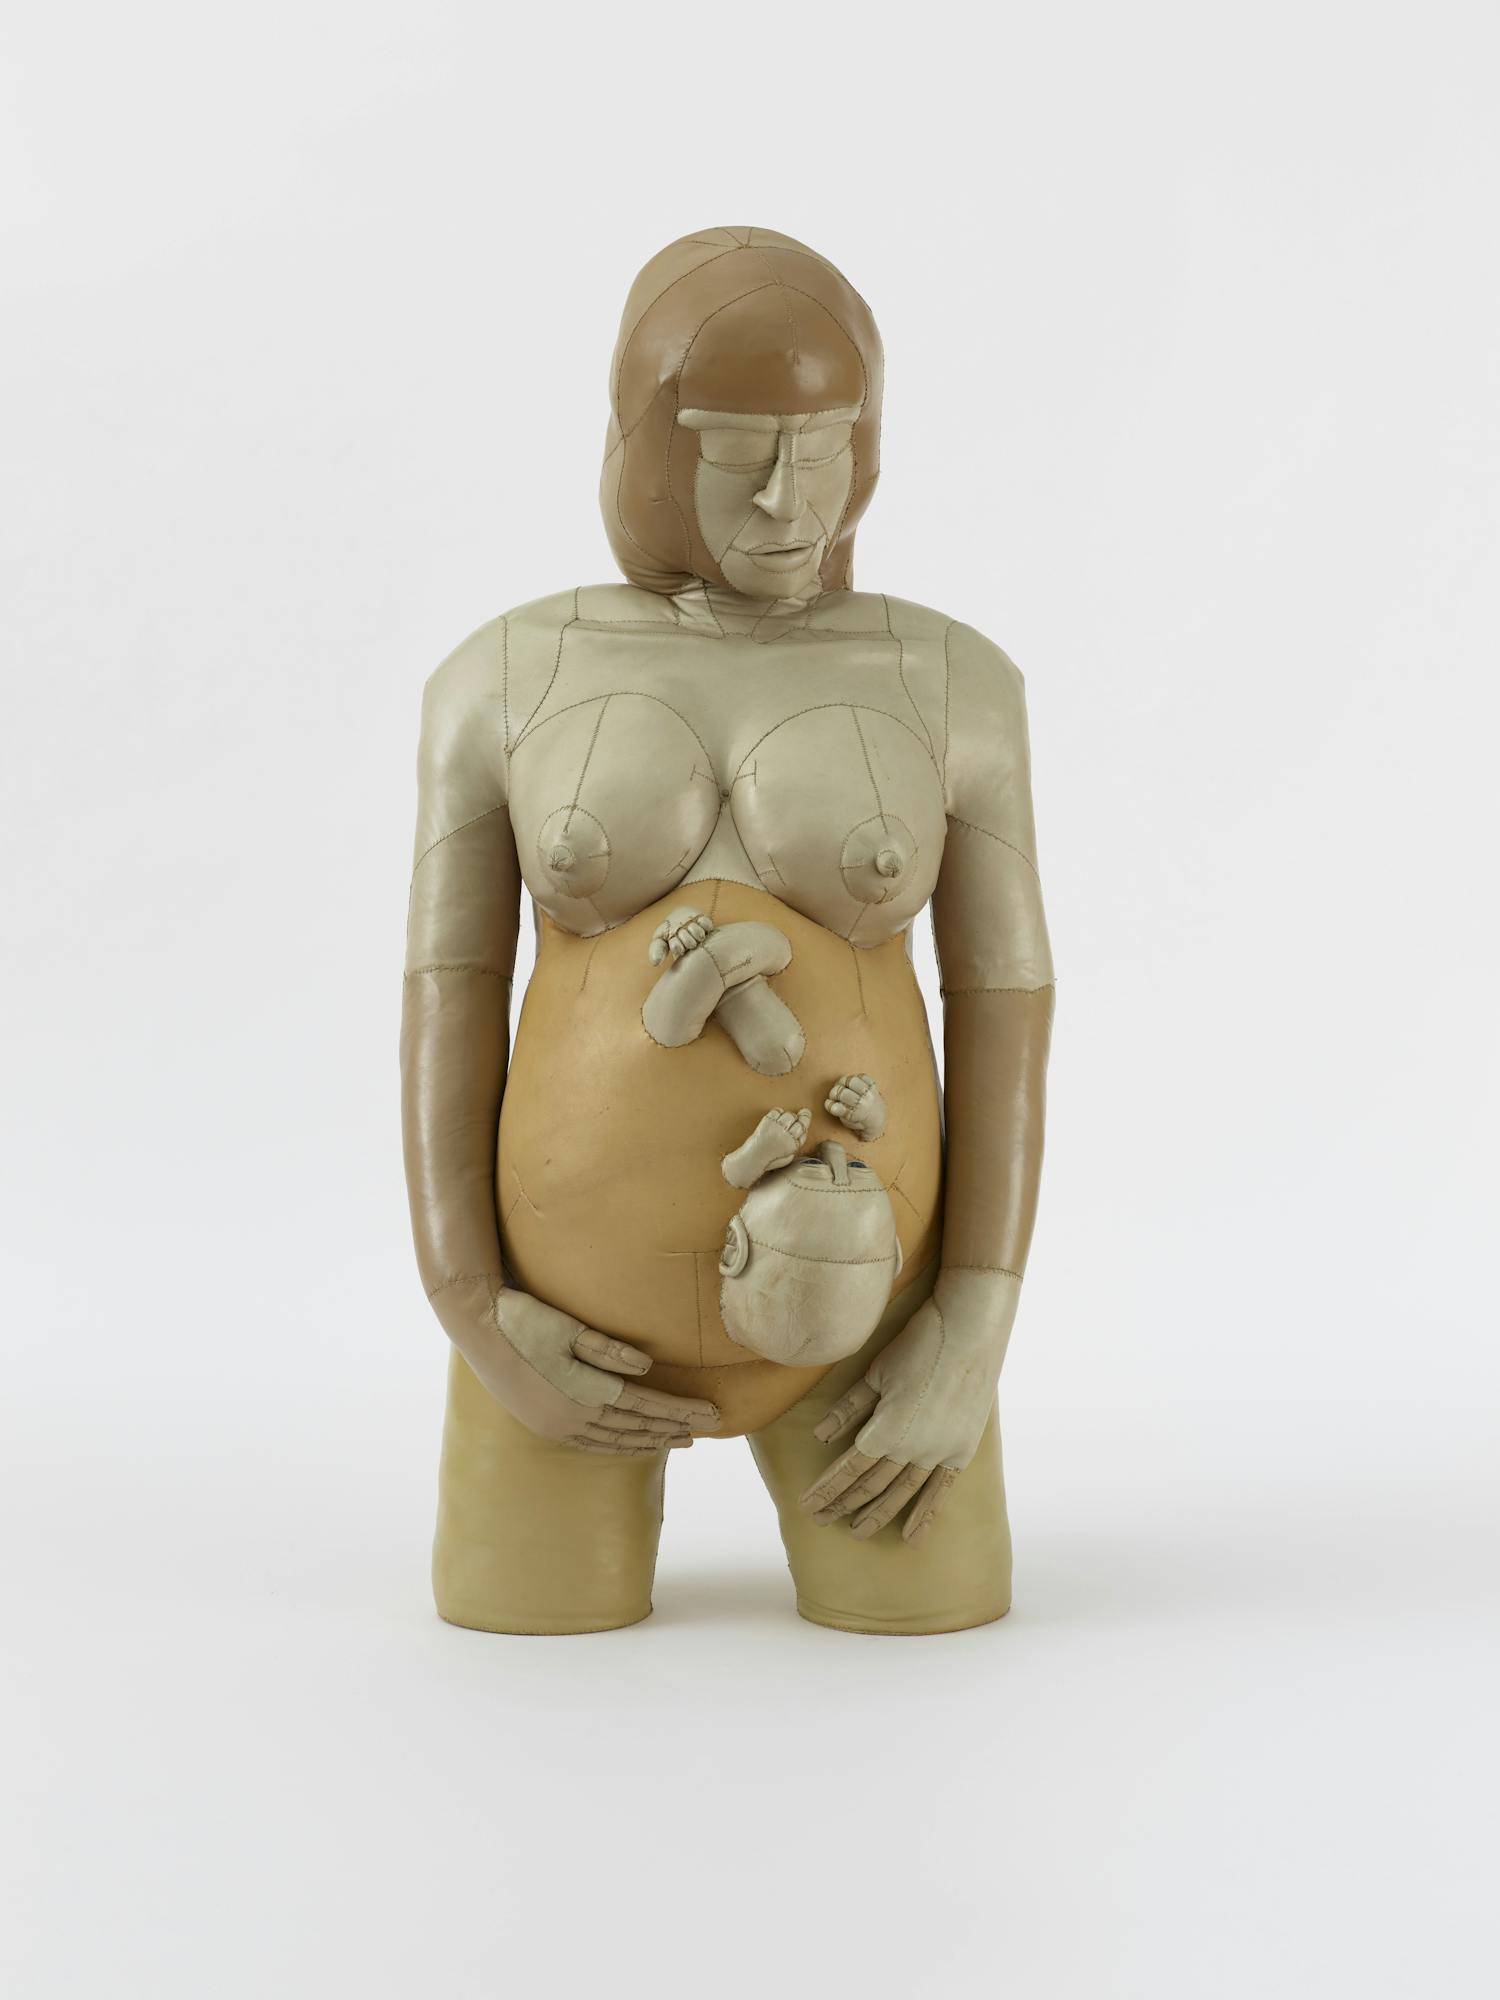 [ID: The image shows a sculpture of a pregnant woman, which is cut off at the middle of her thighs. A baby’s head, arms and legs are protruding from her stomach. The woman is looking down to the side, holding her stomach with one hand, the other hand by her left side. End of ID]